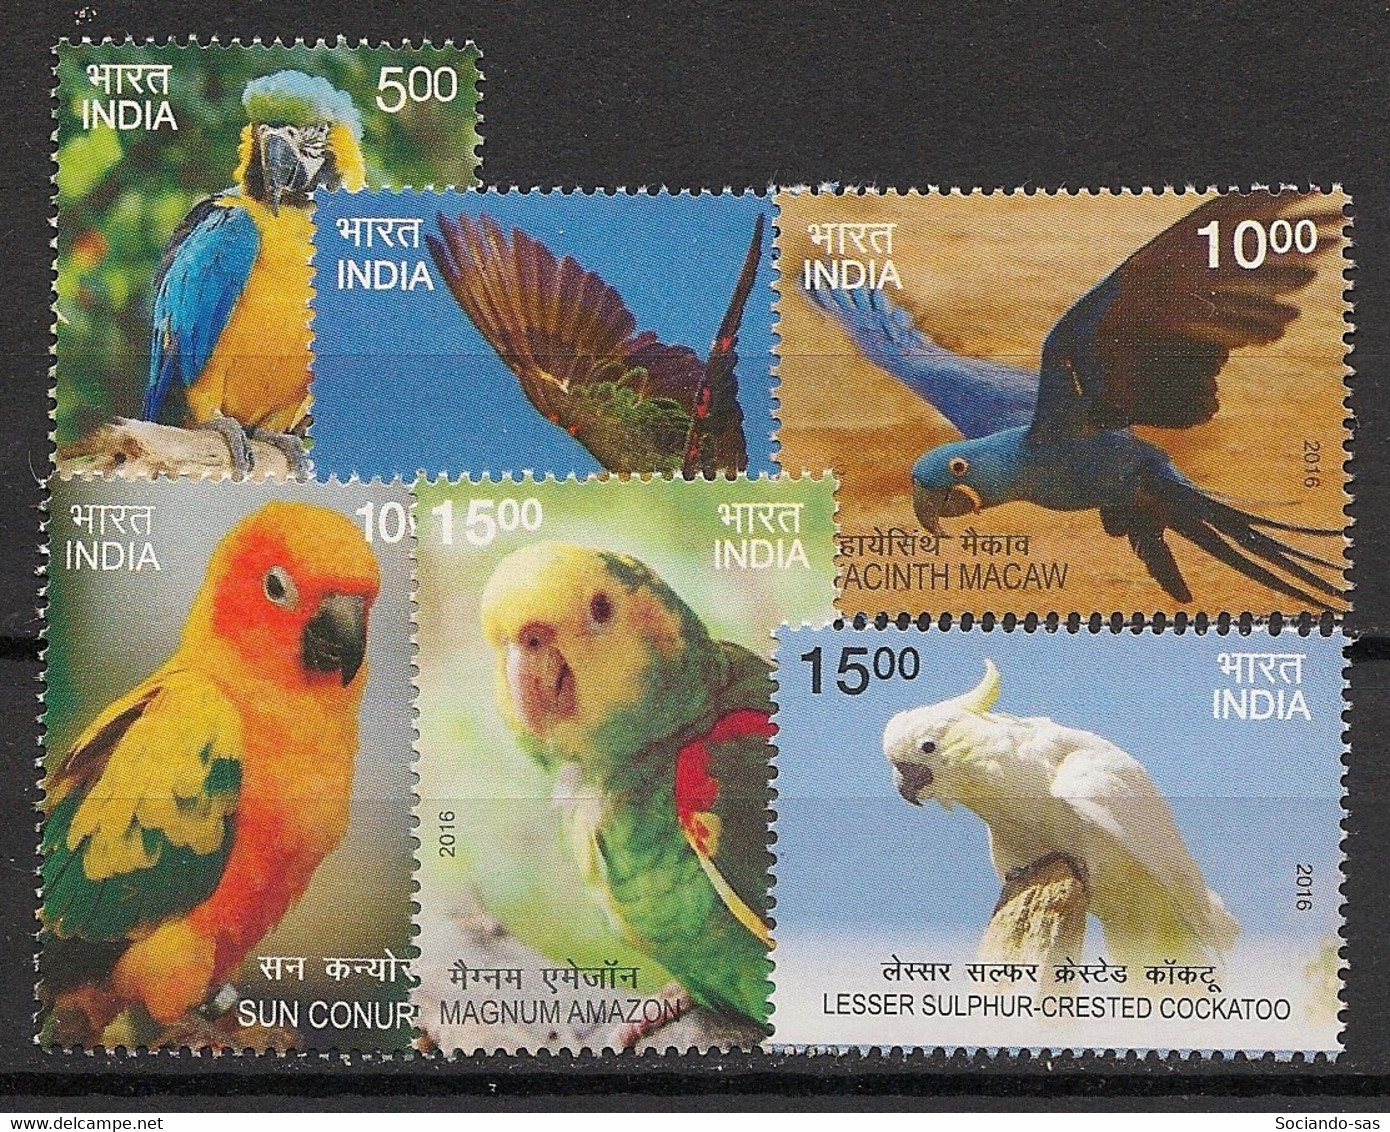 INDIA - 2016 - N°YT. 2732 à 2737 - Oiseaux / Perroquets / Parrots / Tropical Birds - Neuf Luxe ** / MNH / Postfrisch - Papagayos